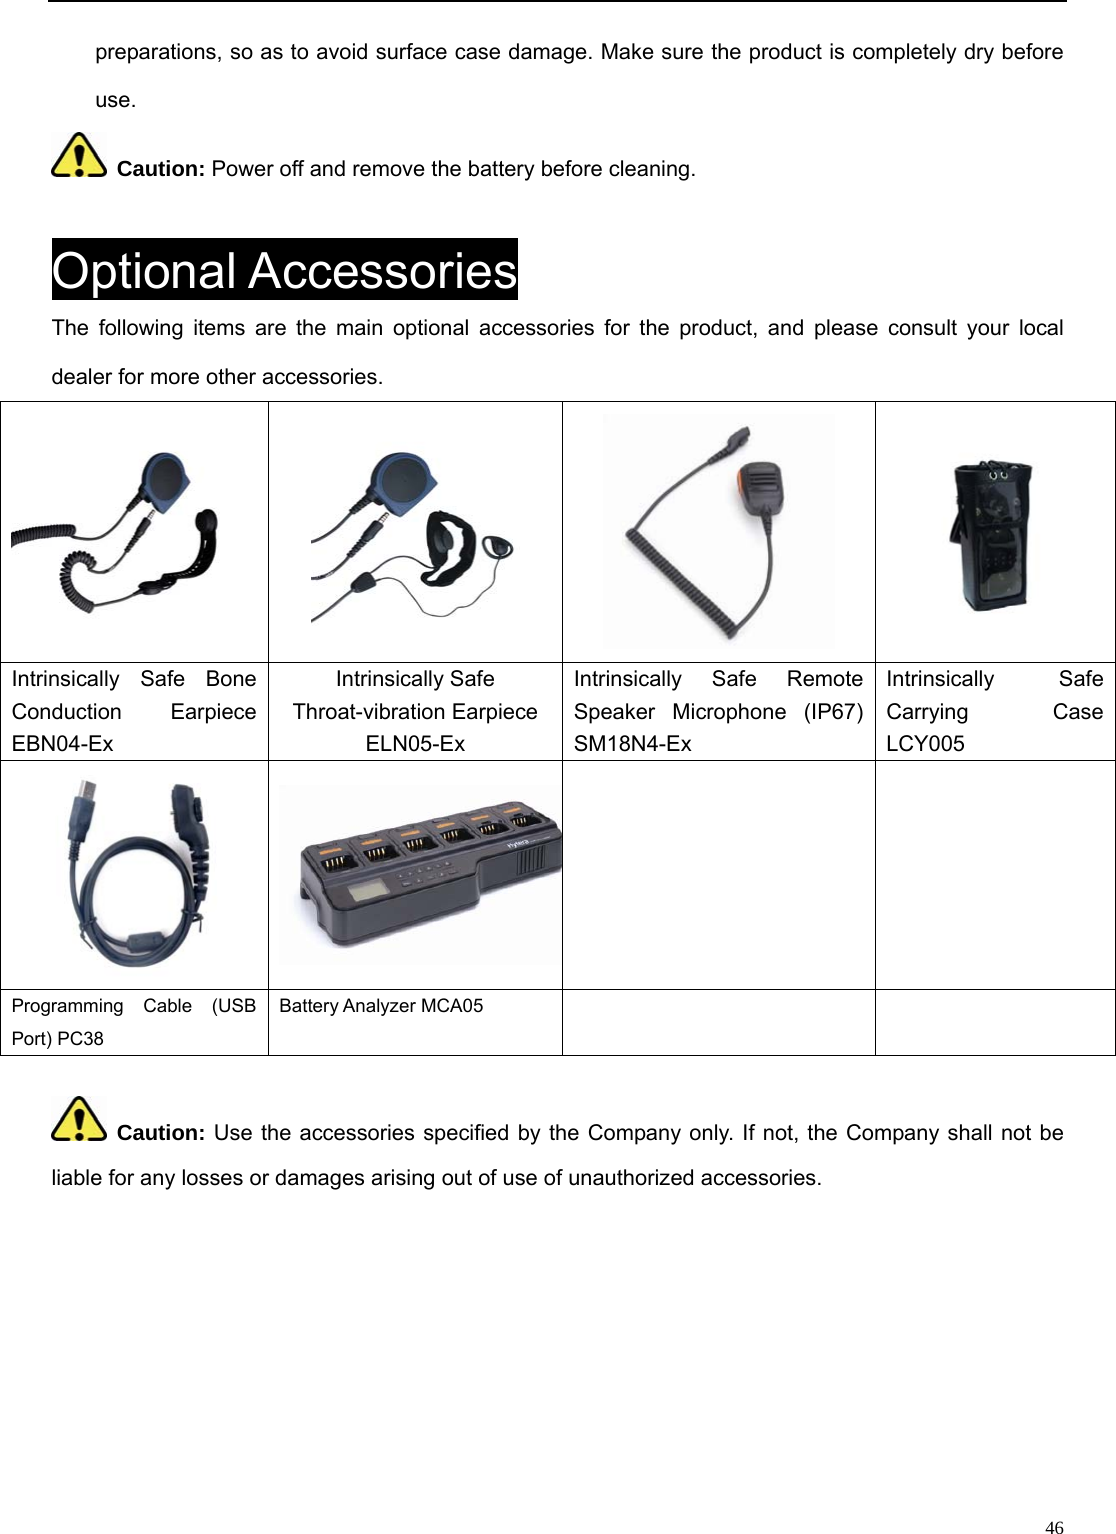                                                                                                              46preparations, so as to avoid surface case damage. Make sure the product is completely dry before use.   Caution: Power off and remove the battery before cleaning.    Optional Accessories The following items are the main optional accessories for the product, and please consult your local dealer for more other accessories.      Intrinsically Safe Bone Conduction Earpiece EBN04-Ex Intrinsically Safe Throat-vibration Earpiece ELN05-Ex Intrinsically Safe Remote Speaker Microphone (IP67) SM18N4-Ex   Intrinsically Safe Carrying Case LCY005    Programming Cable (USB Port) PC38 Battery Analyzer MCA05     Caution: Use the accessories specified by the Company only. If not, the Company shall not be liable for any losses or damages arising out of use of unauthorized accessories.           